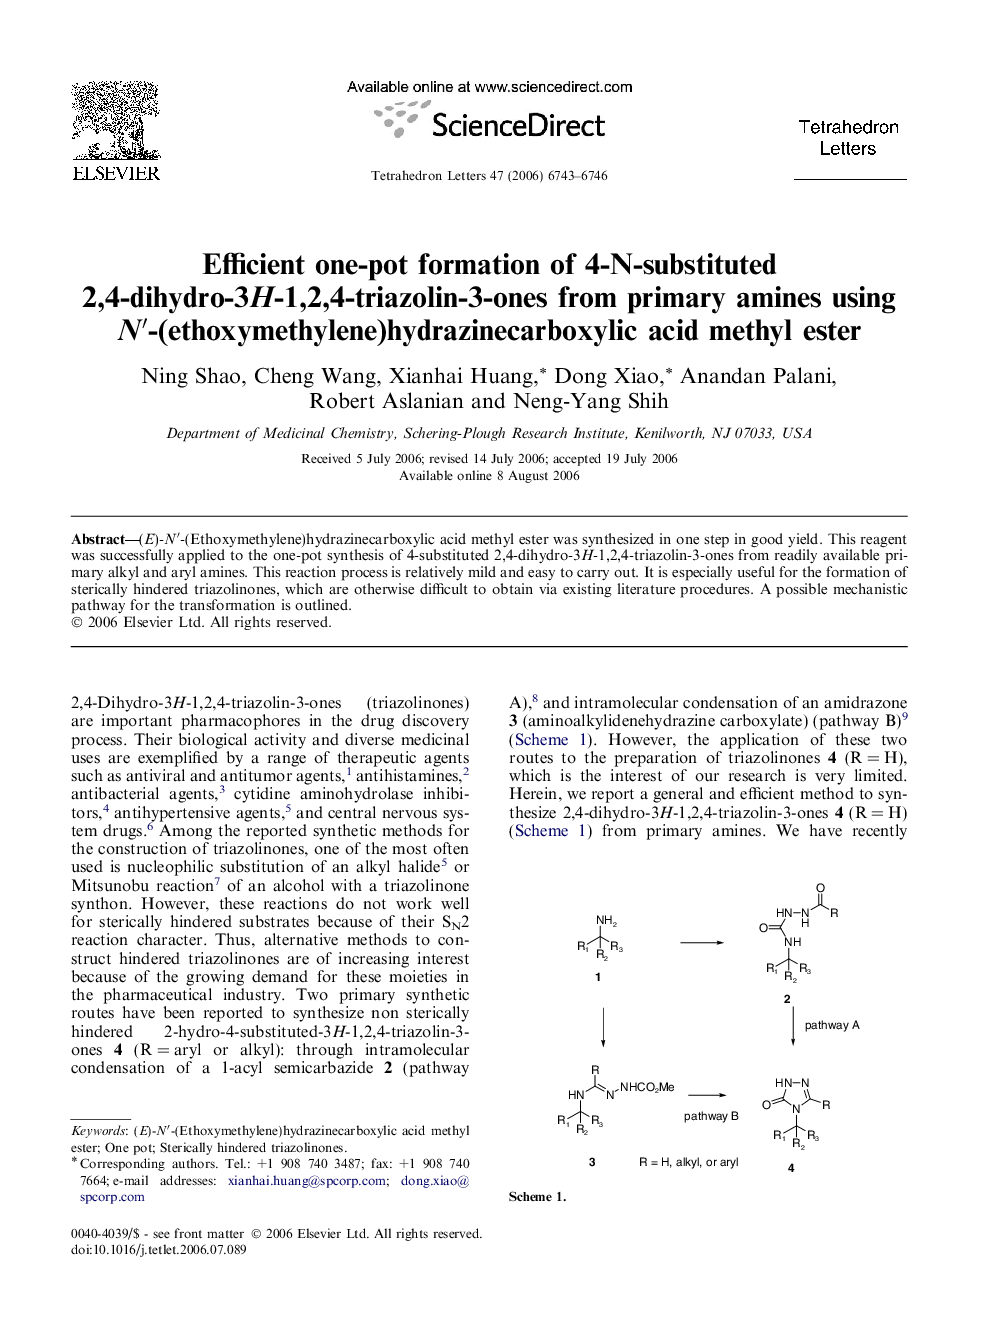 Efficient one-pot formation of 4-N-substituted 2,4-dihydro-3H-1,2,4-triazolin-3-ones from primary amines using Nâ²-(ethoxymethylene)hydrazinecarboxylic acid methyl ester